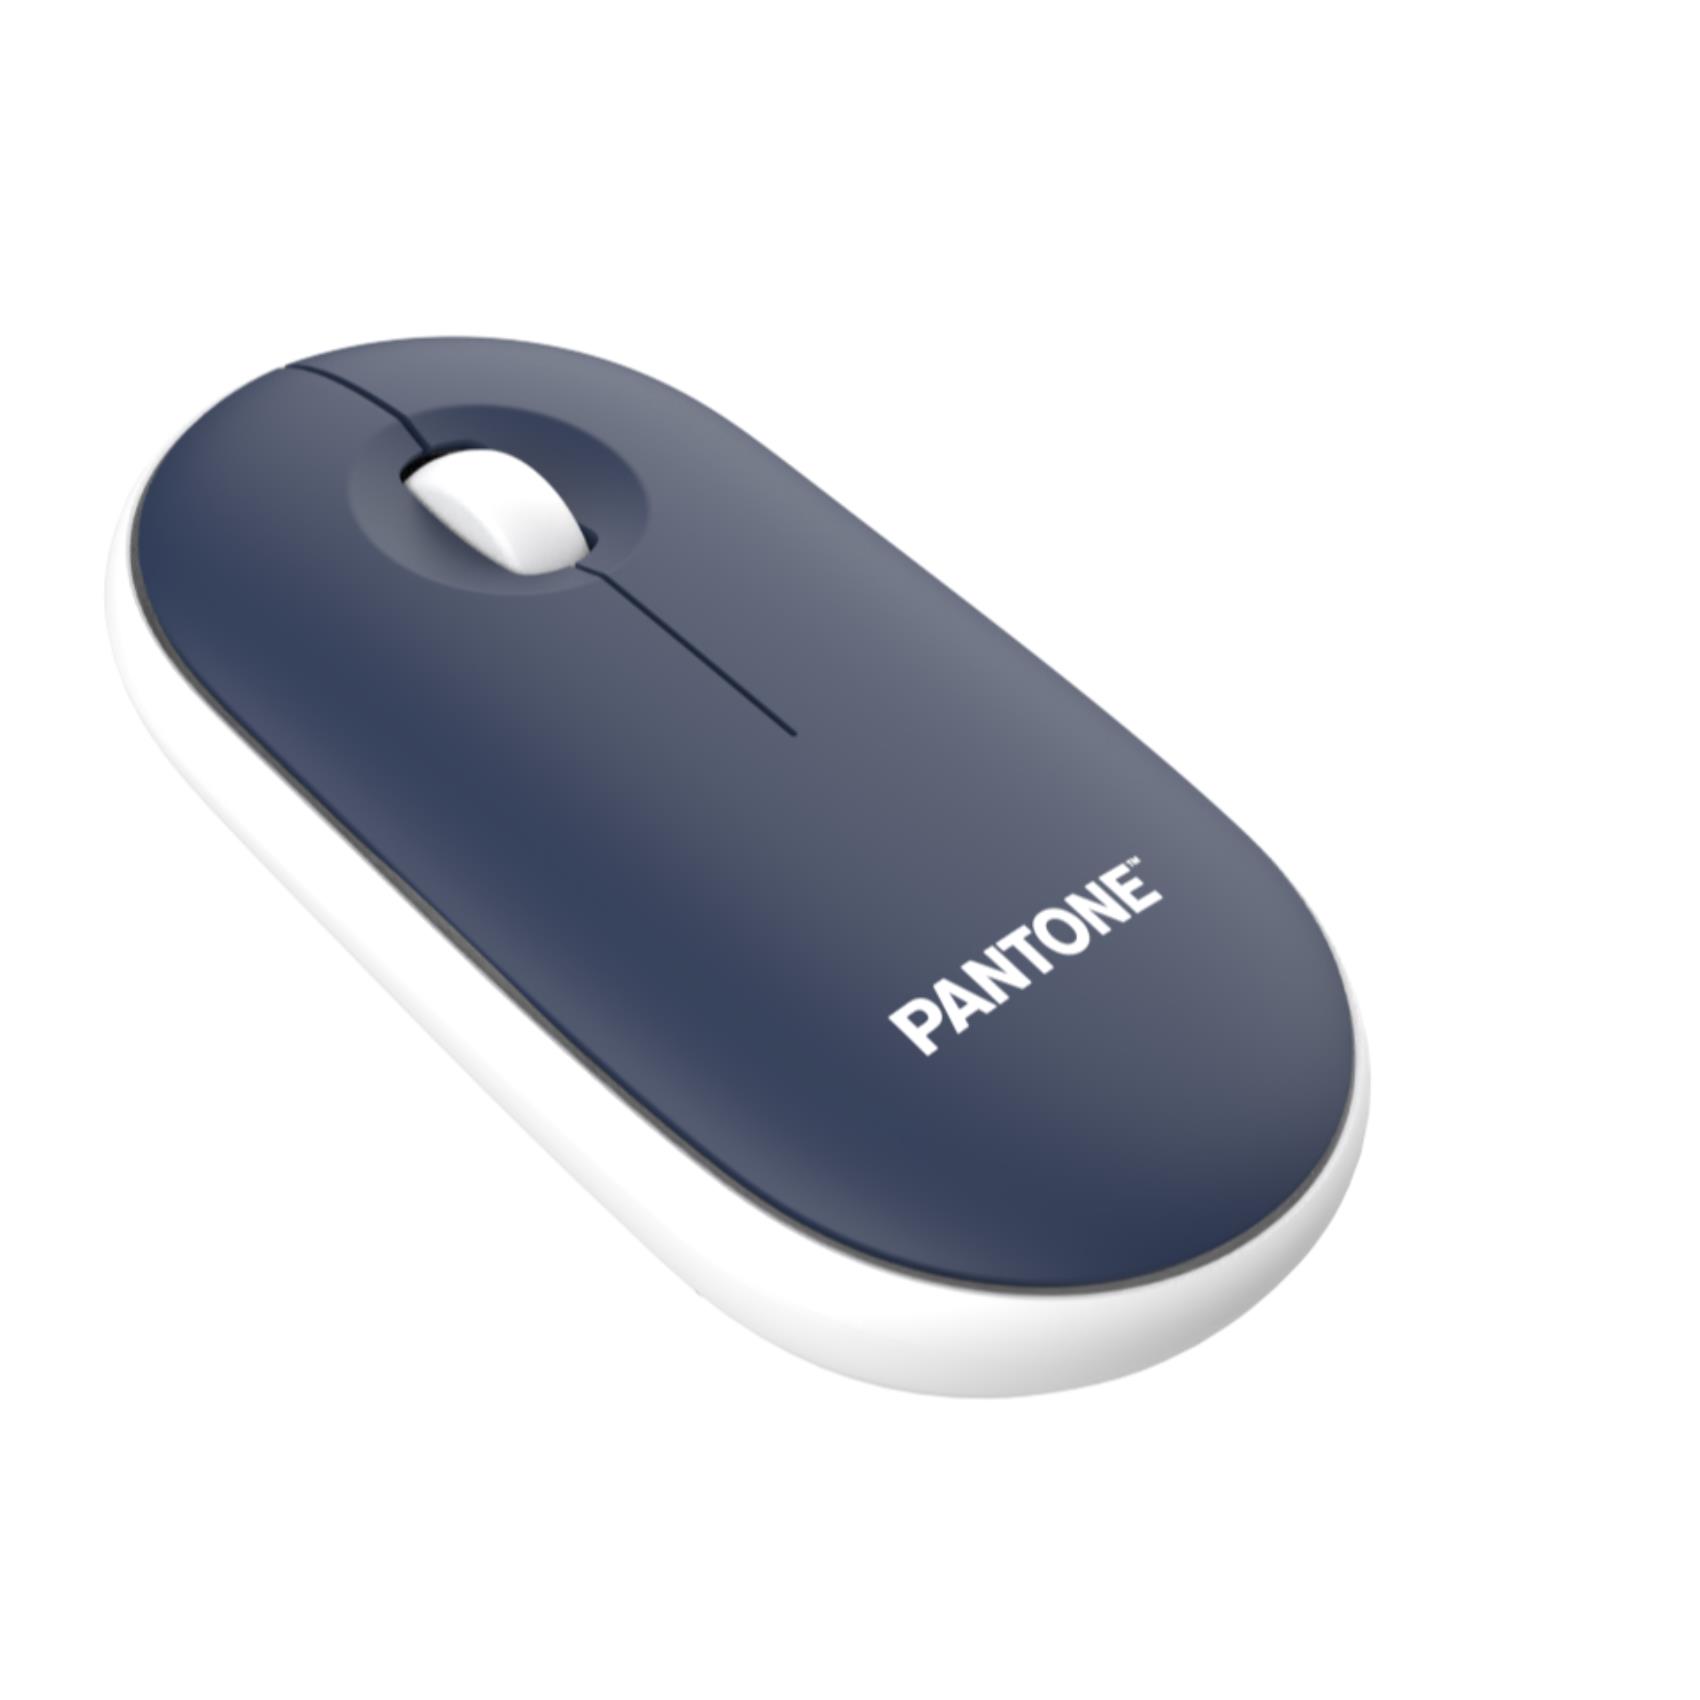 PANTONE MOUSE CON DONGLE NAVY BLUE